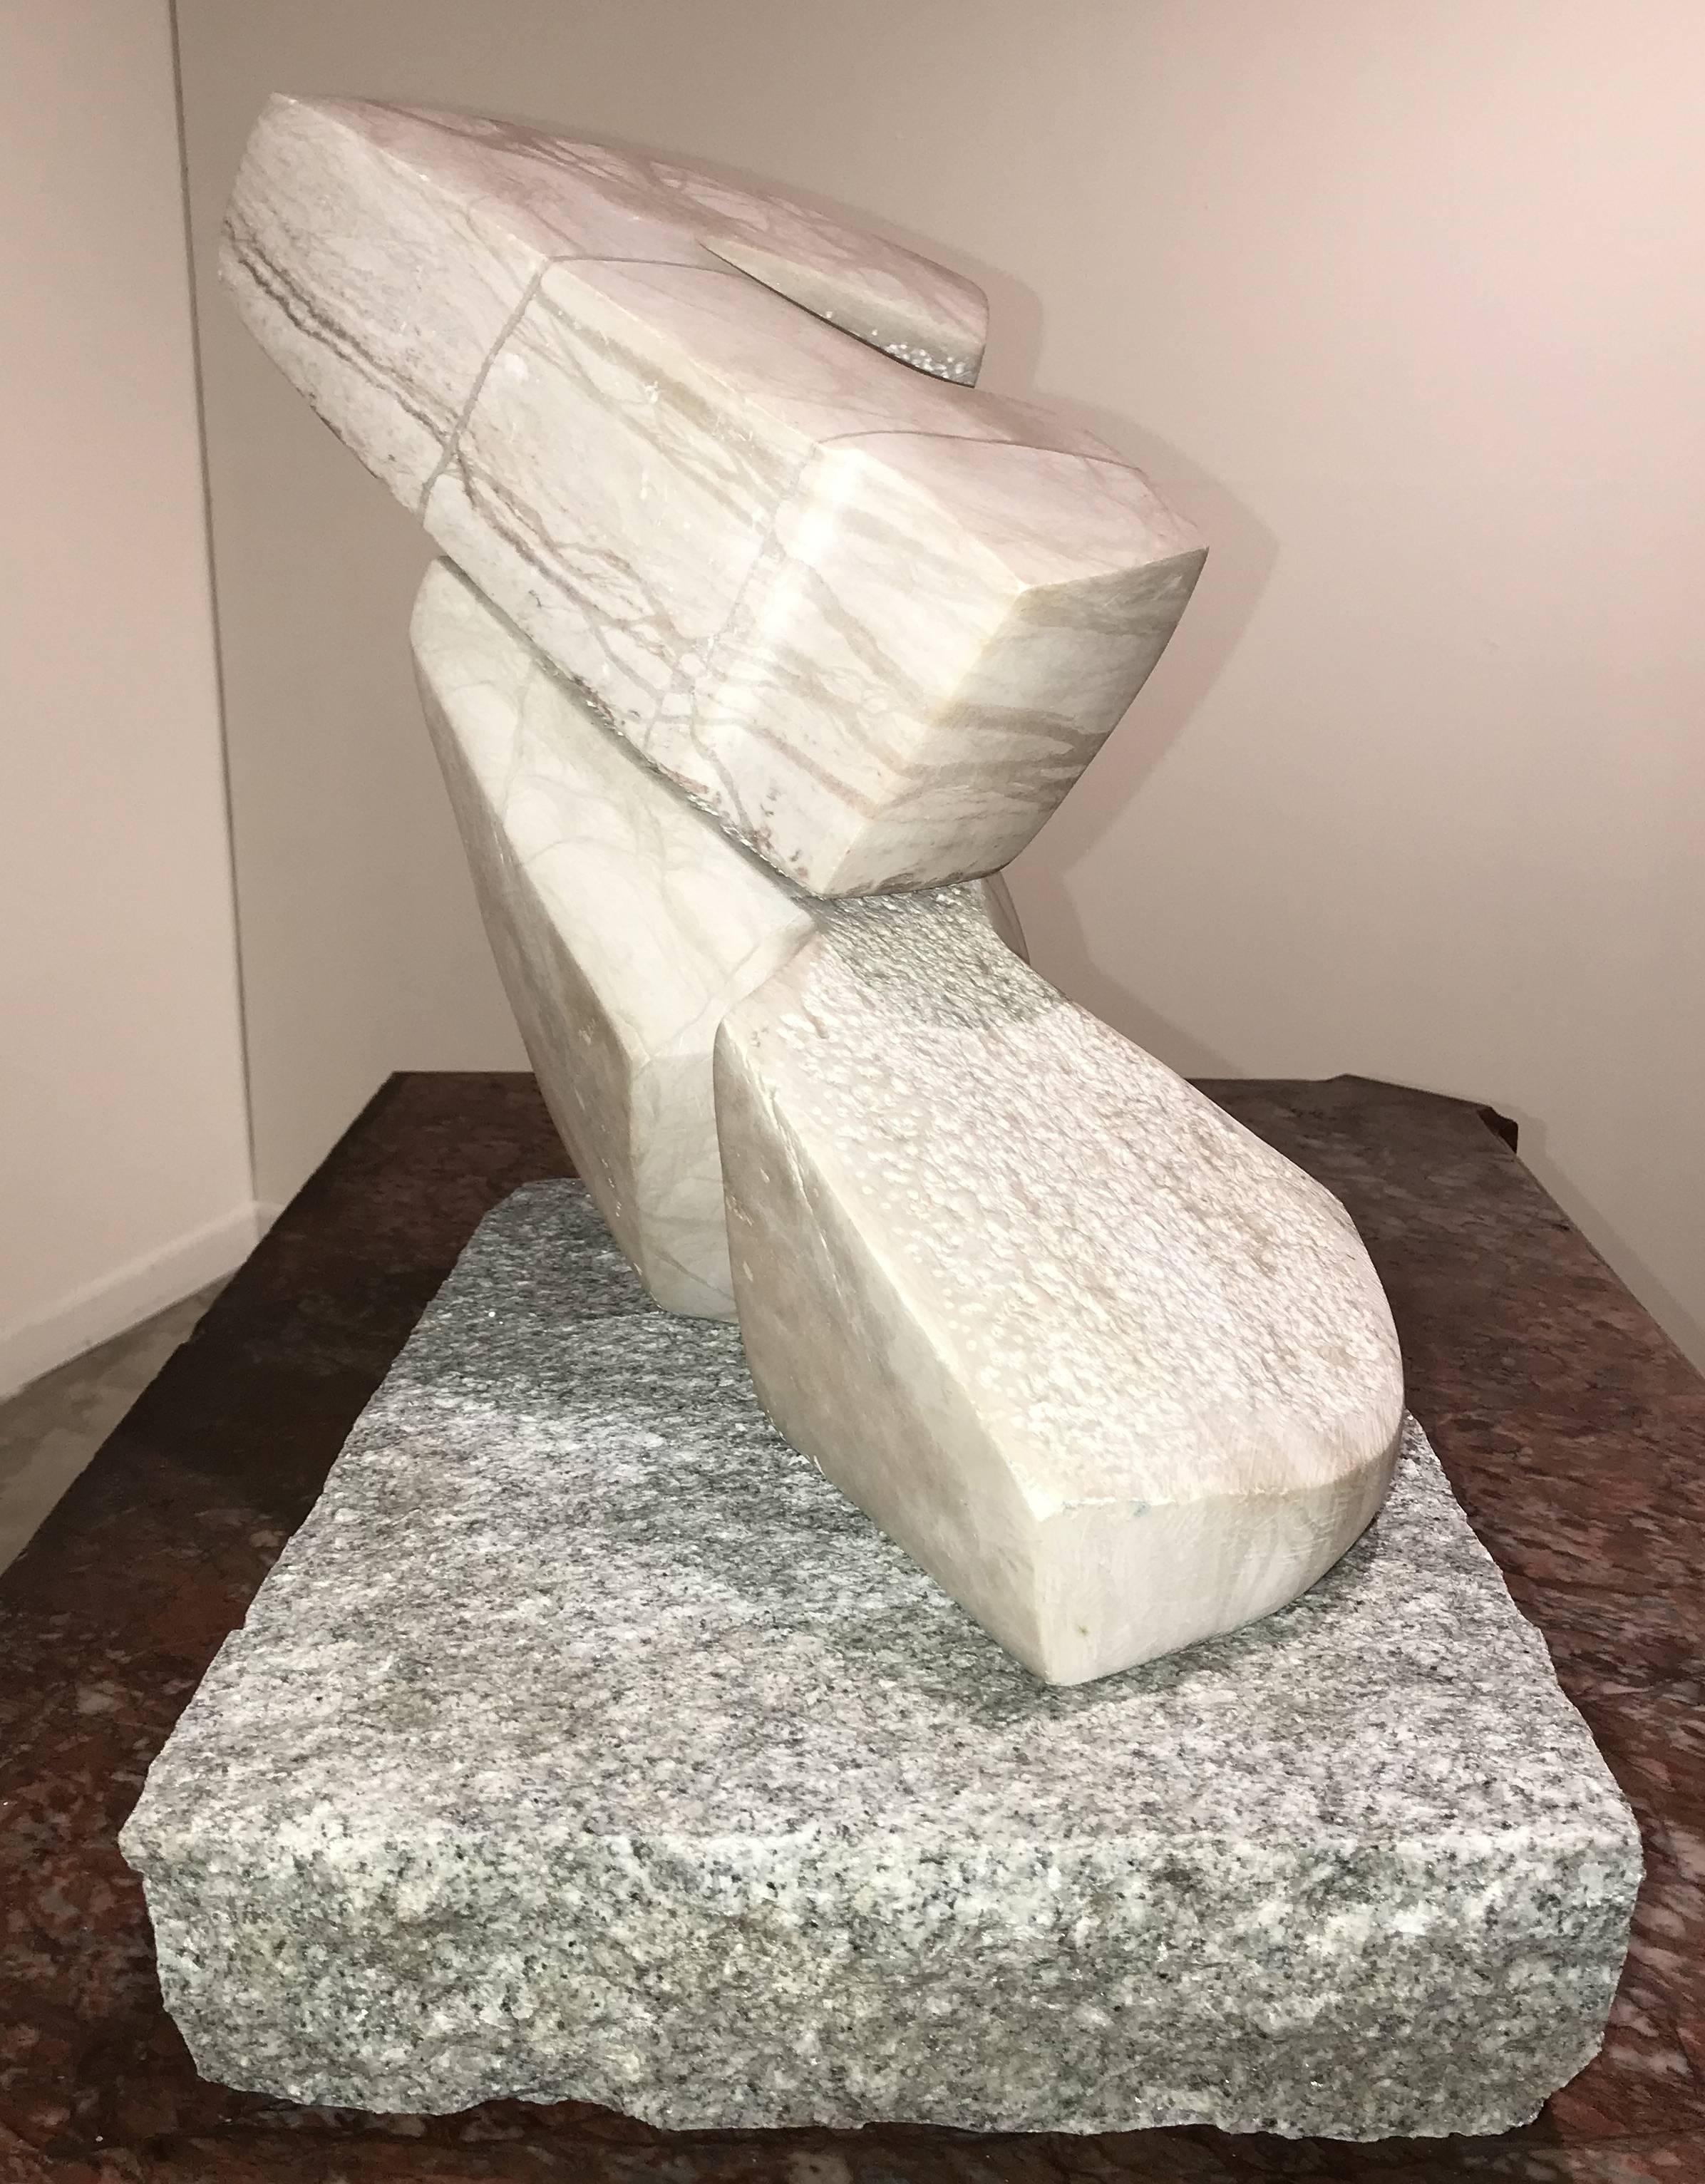 Abstract Marble Sculpture on Granite Plinth - Beige Abstract Sculpture by Unknown